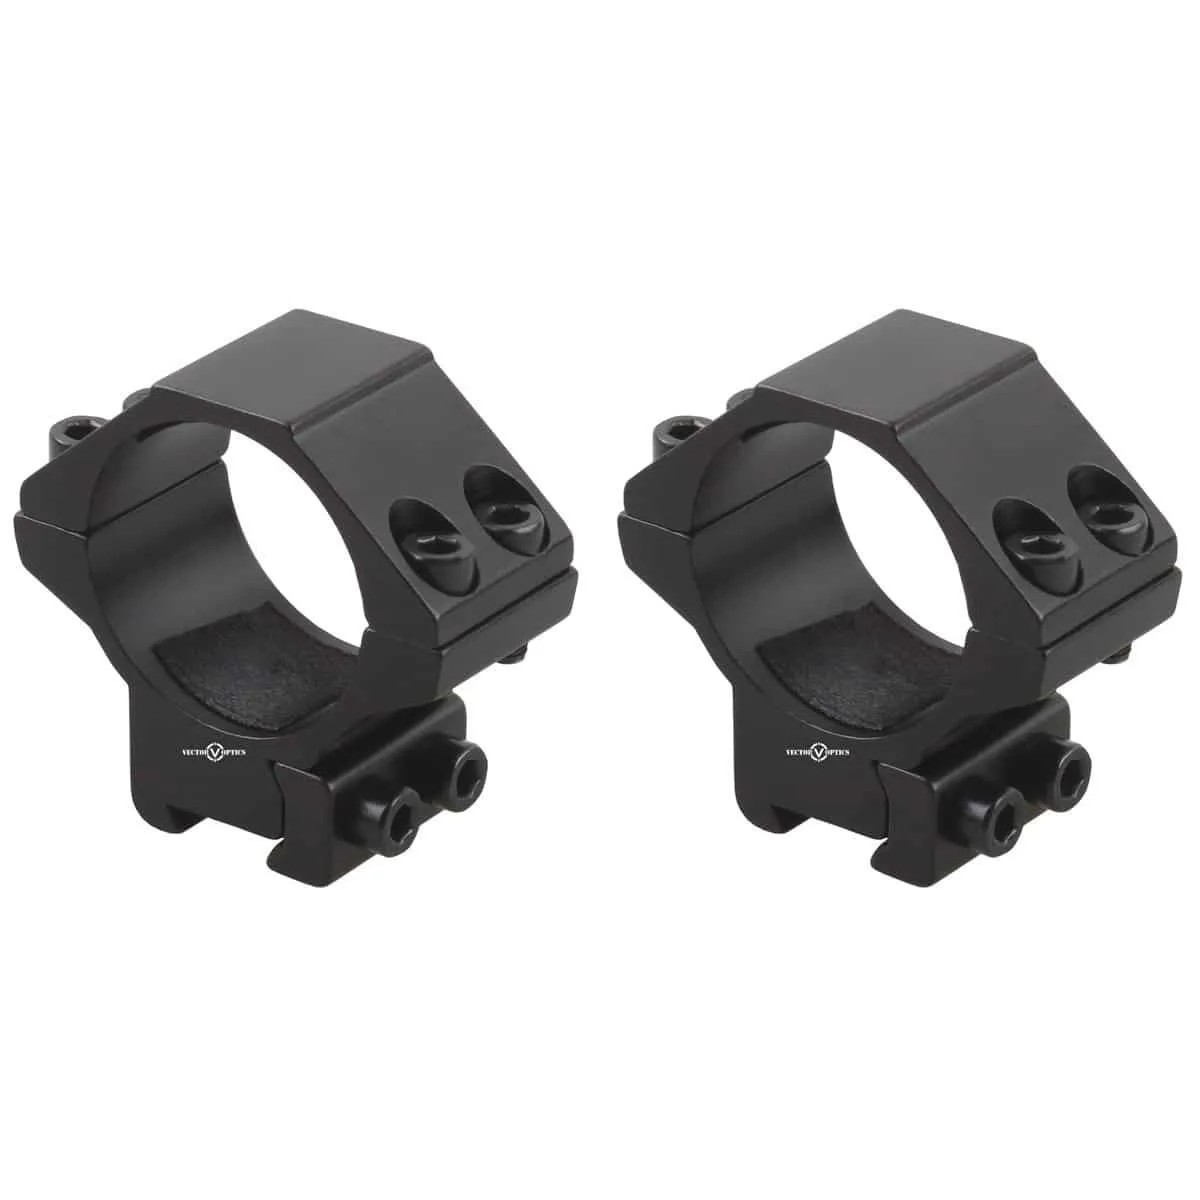 1.00" ring 3/8 DOVETAIL SCOPE MOUNTS 